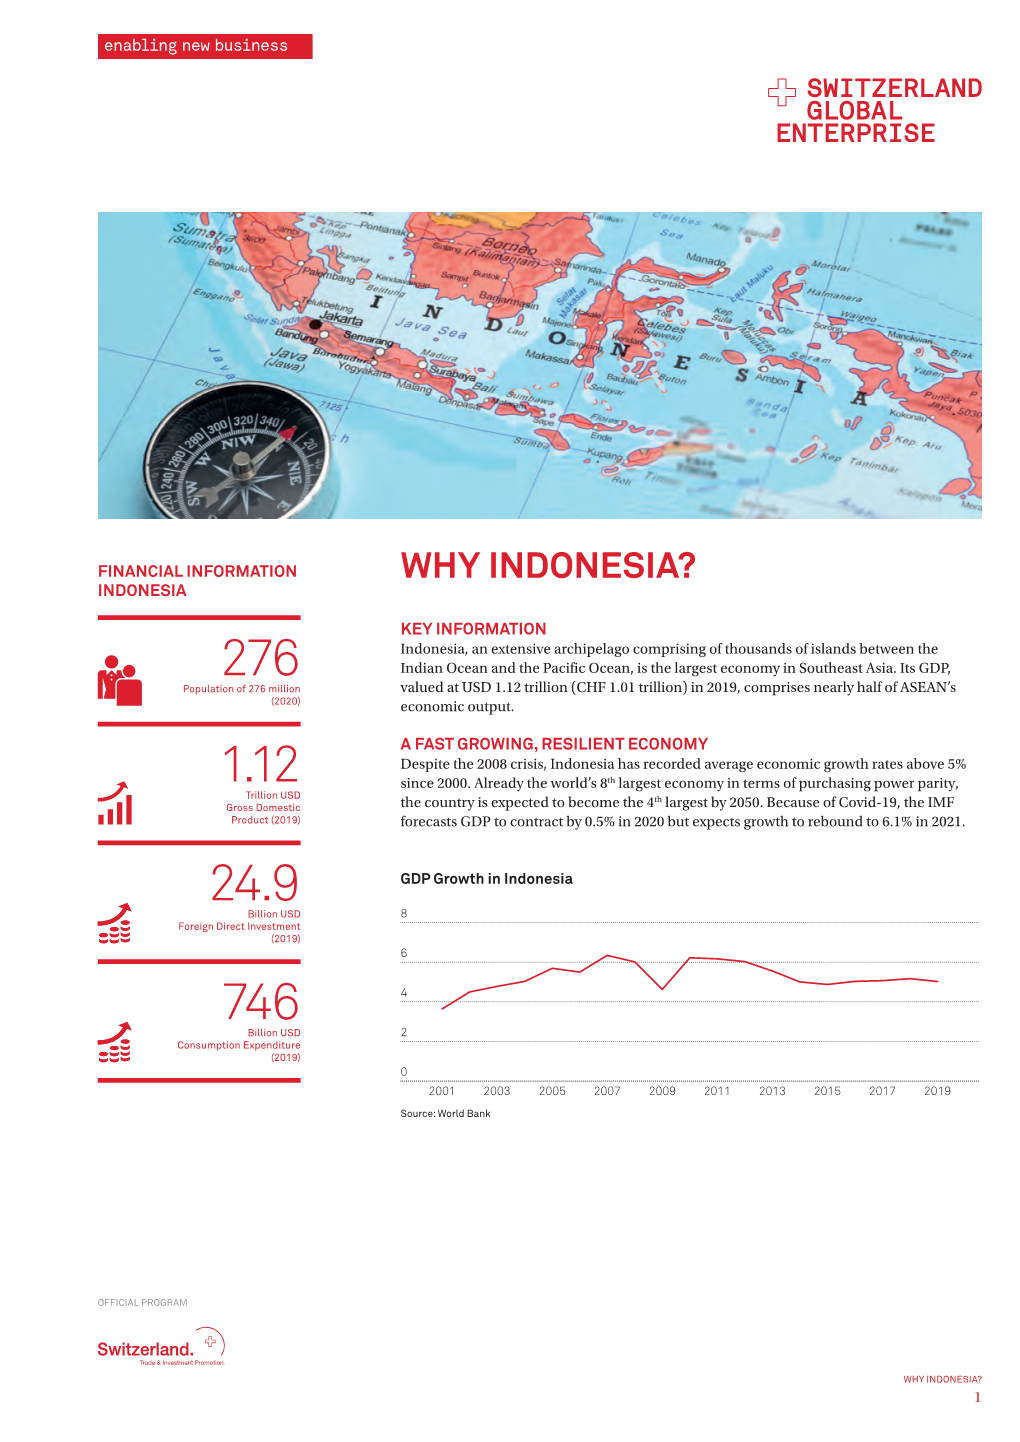 Why Indonesia? Indonesia